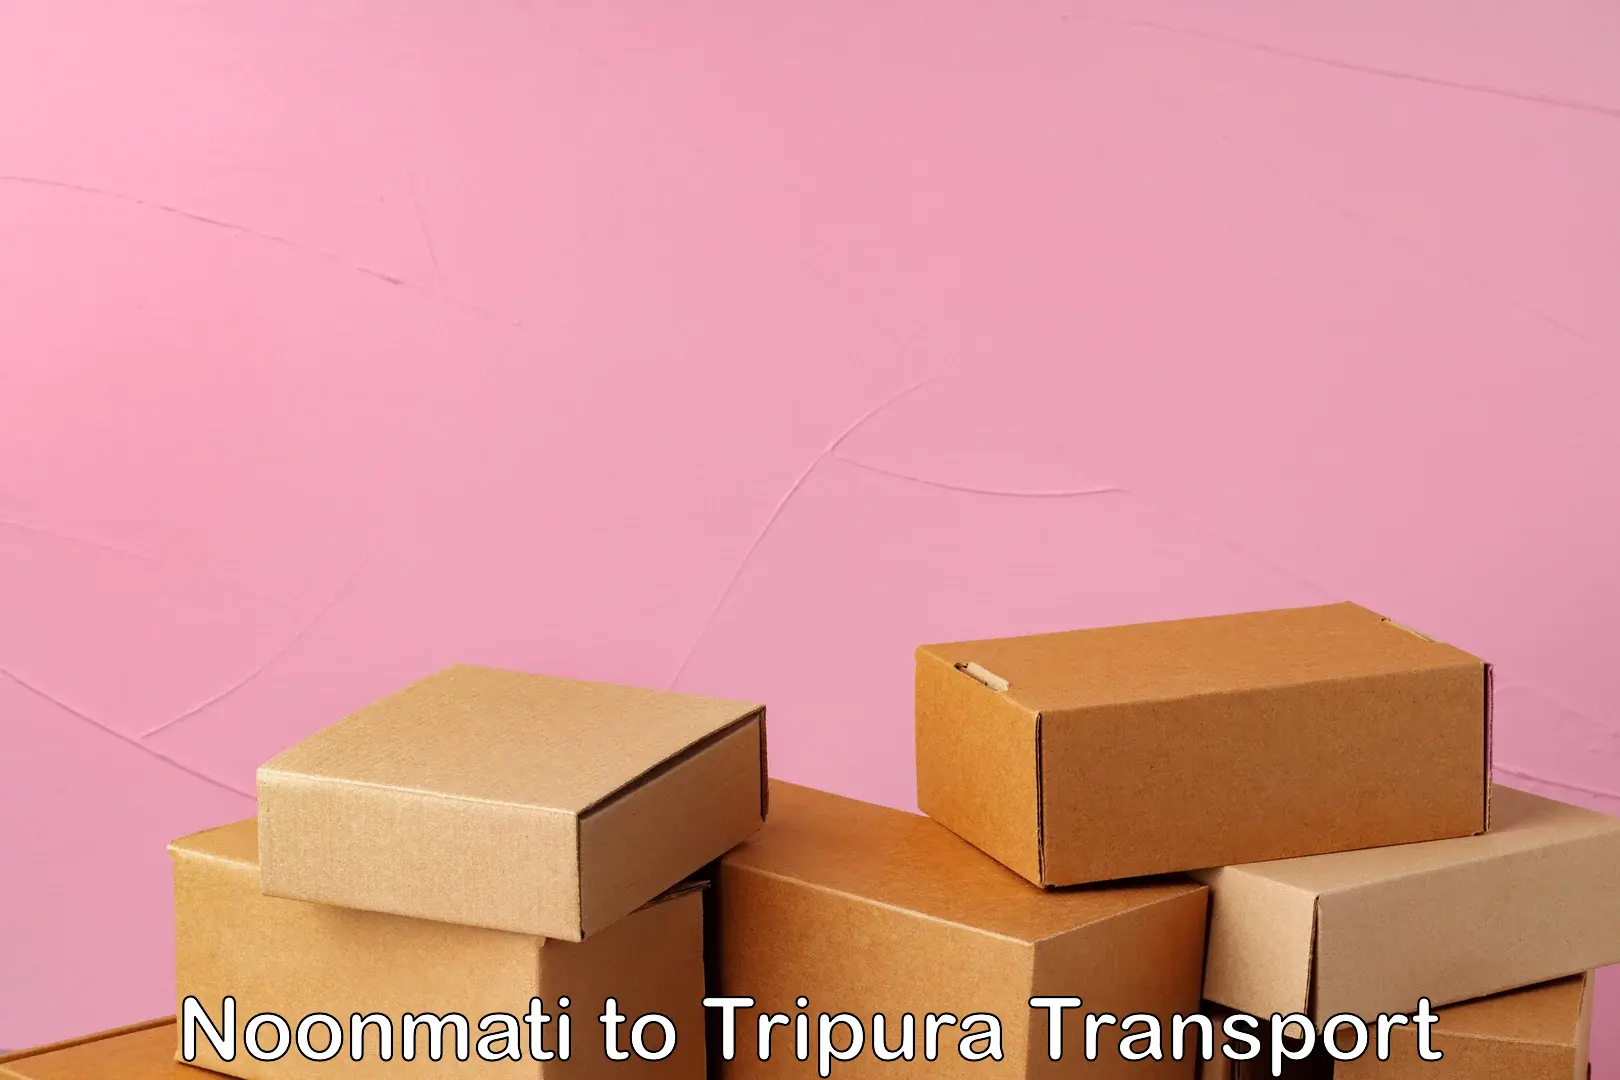 Truck transport companies in India Noonmati to Tripura